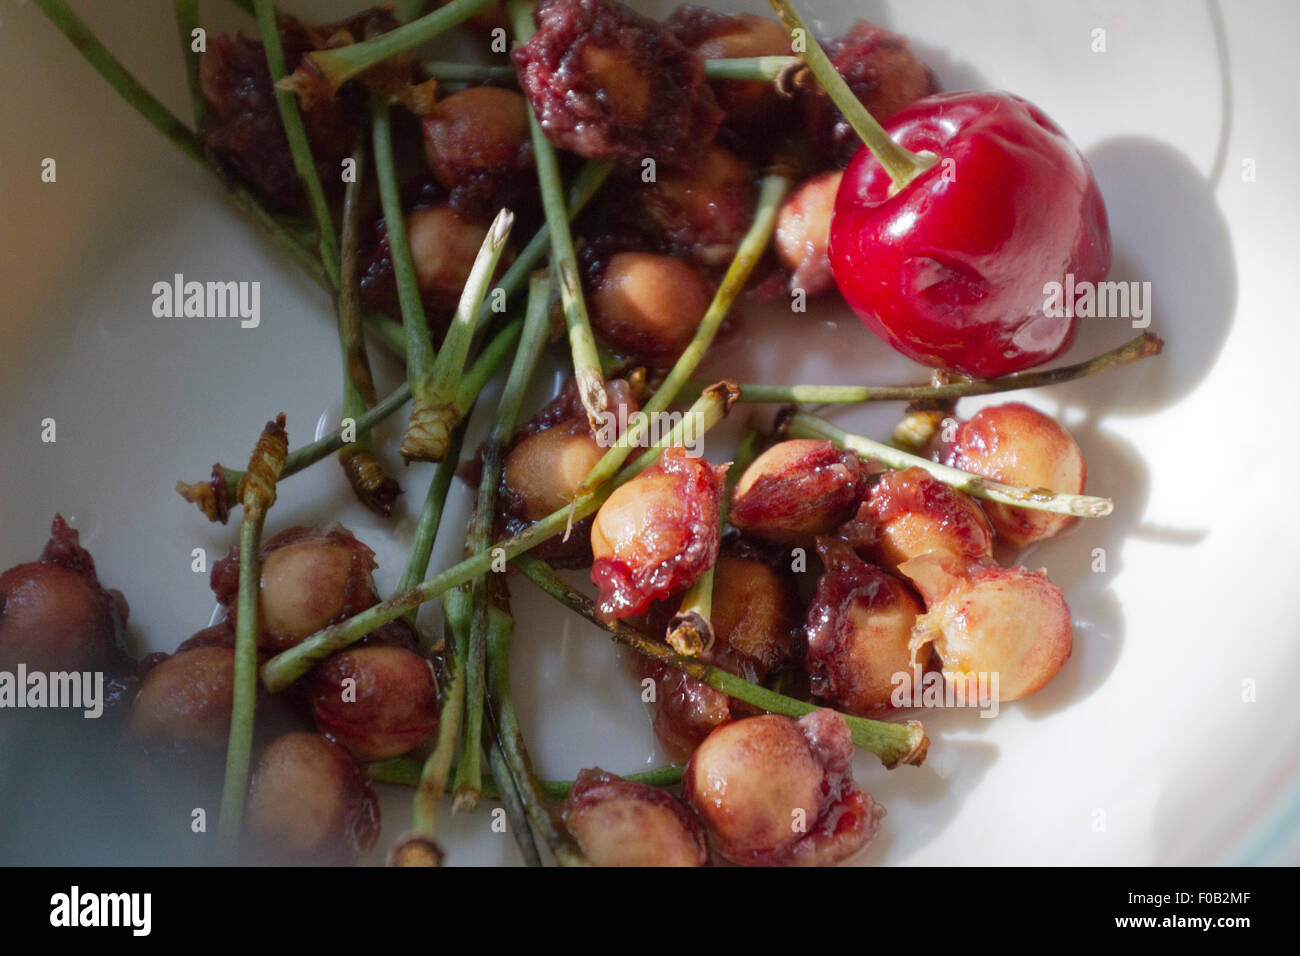 Close up of a bowl of cherry pits and stems, and one rotten cherry Stock Photo